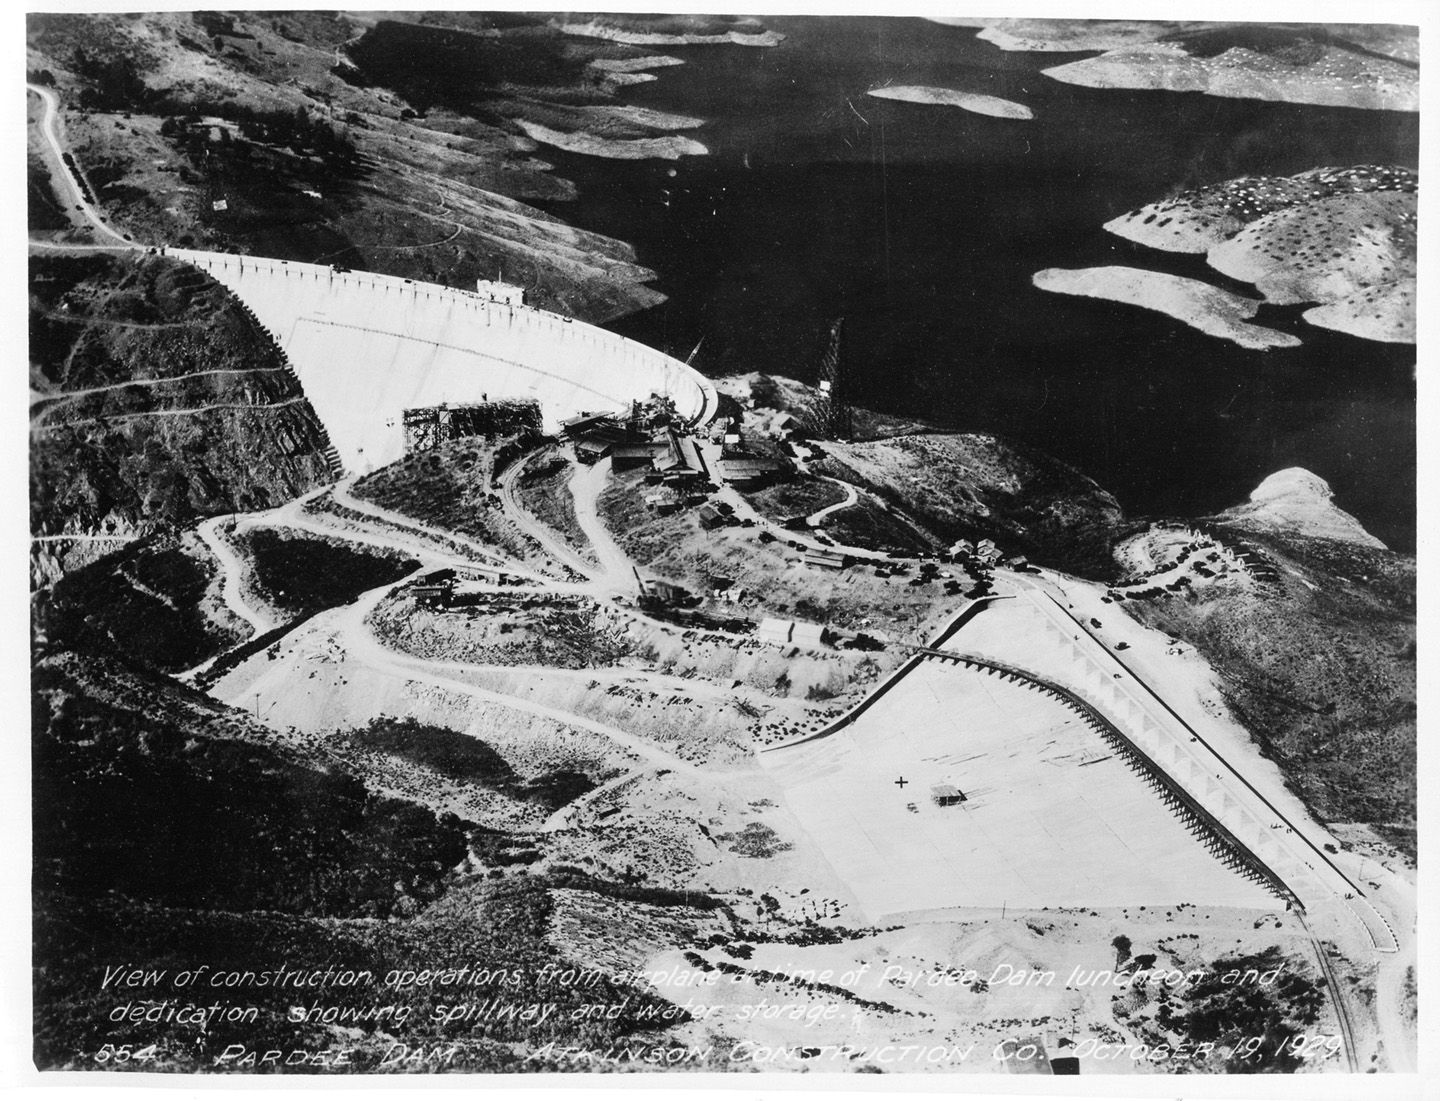 View of construction operations from airplane at time of Pardee Dam luncheon and dedication showing spillway and water storage. (October 1929)	